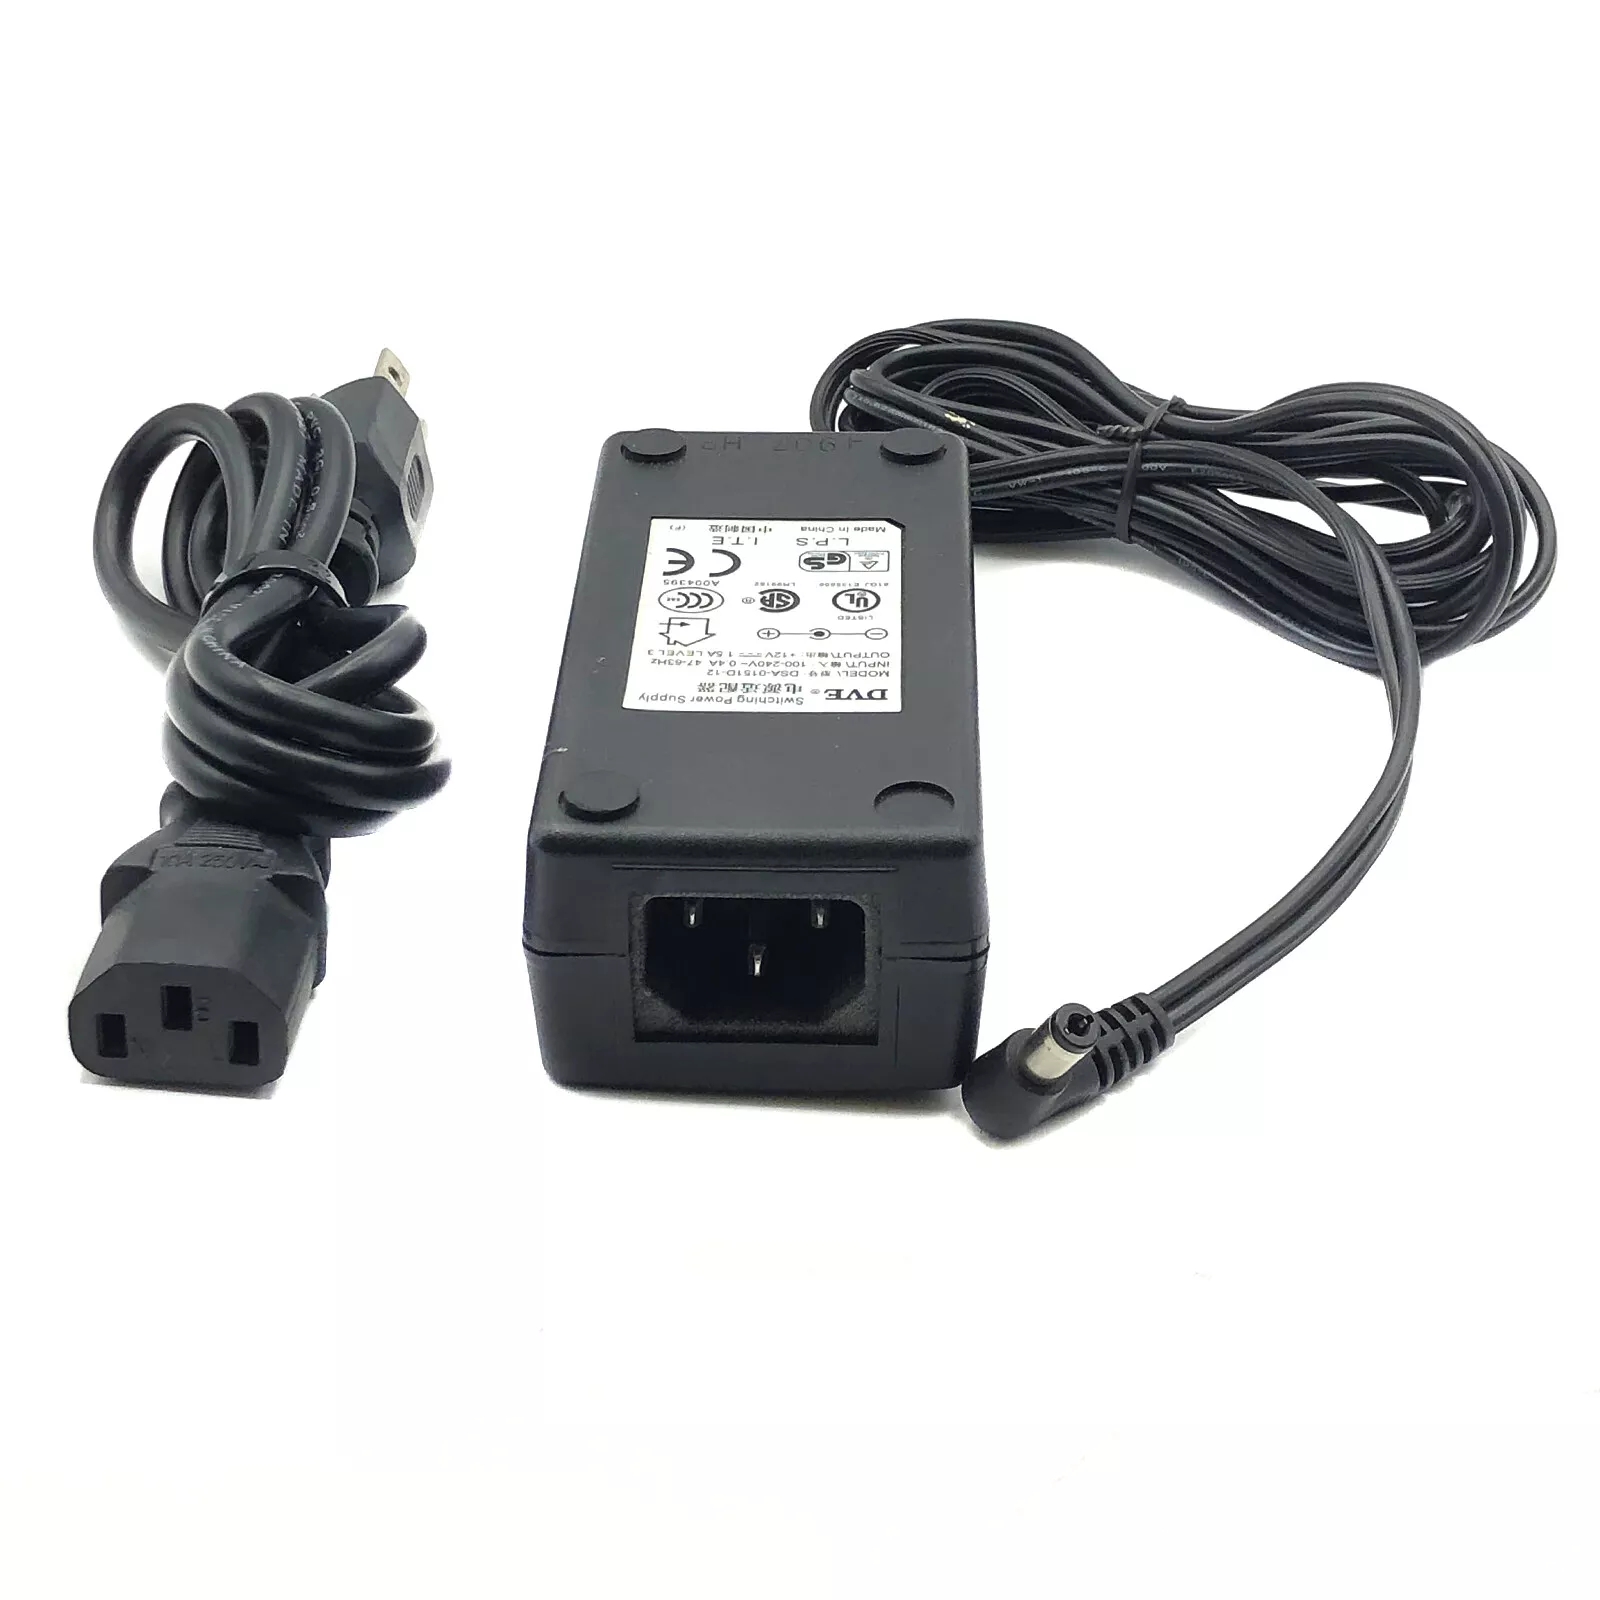 *Brand NEW*Genuine 12V 1.5A 18W DVE AC DC Switching Adapter Model DSA-0151D-12 Power Supply